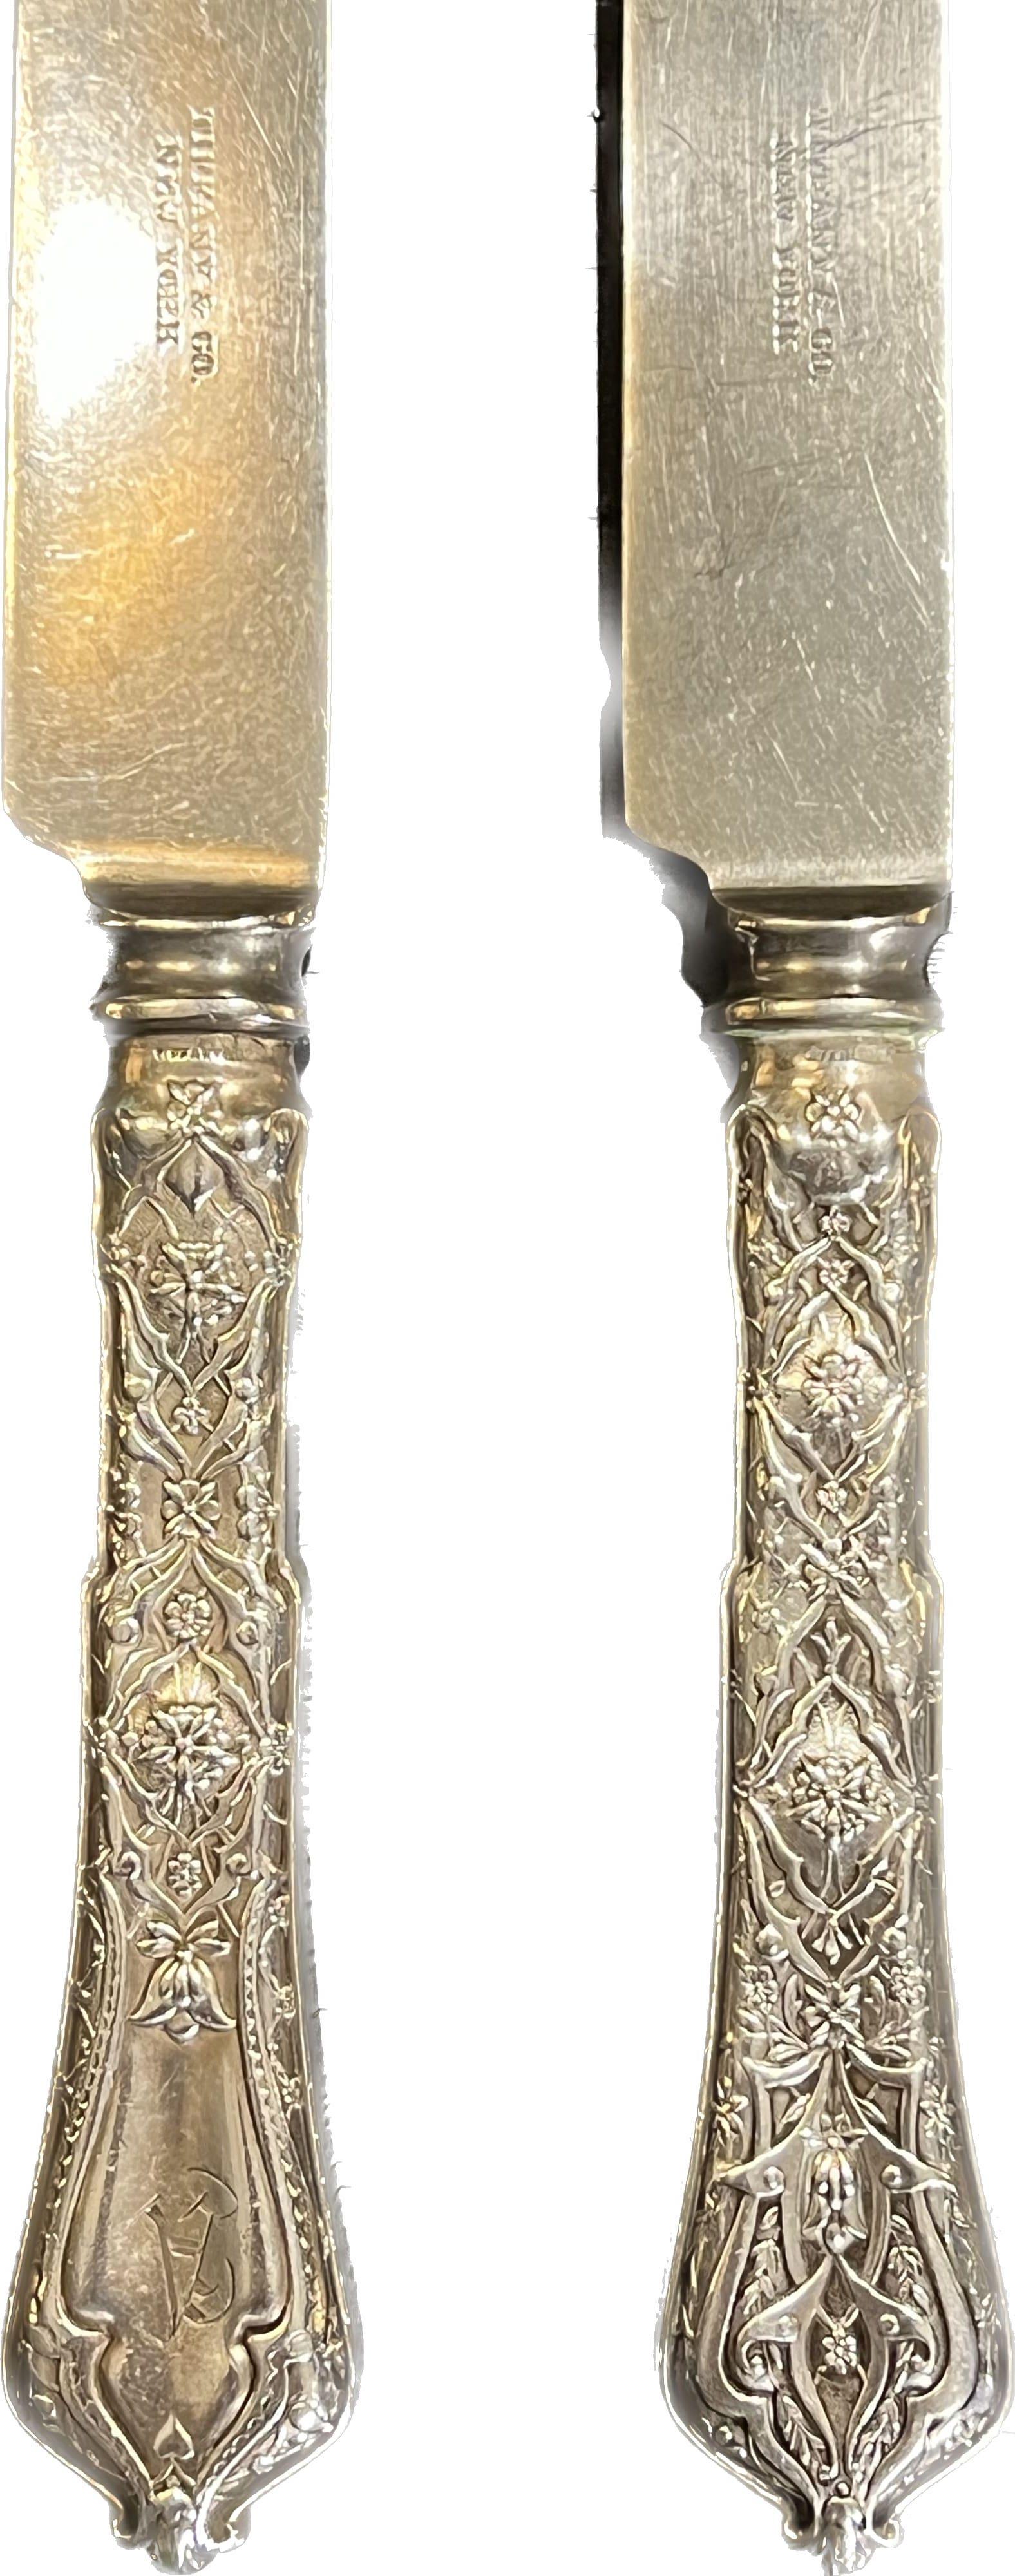 Mr. Giallo is opening his personal vault to sell a collection of his treasured antiques he's held on for so long.

ABOUT ITEM 
Tiffany & Co Sterling Silver 1872 Persian Pattern. Two pairs of an exquisite fork and knife set. Truly perfect for any